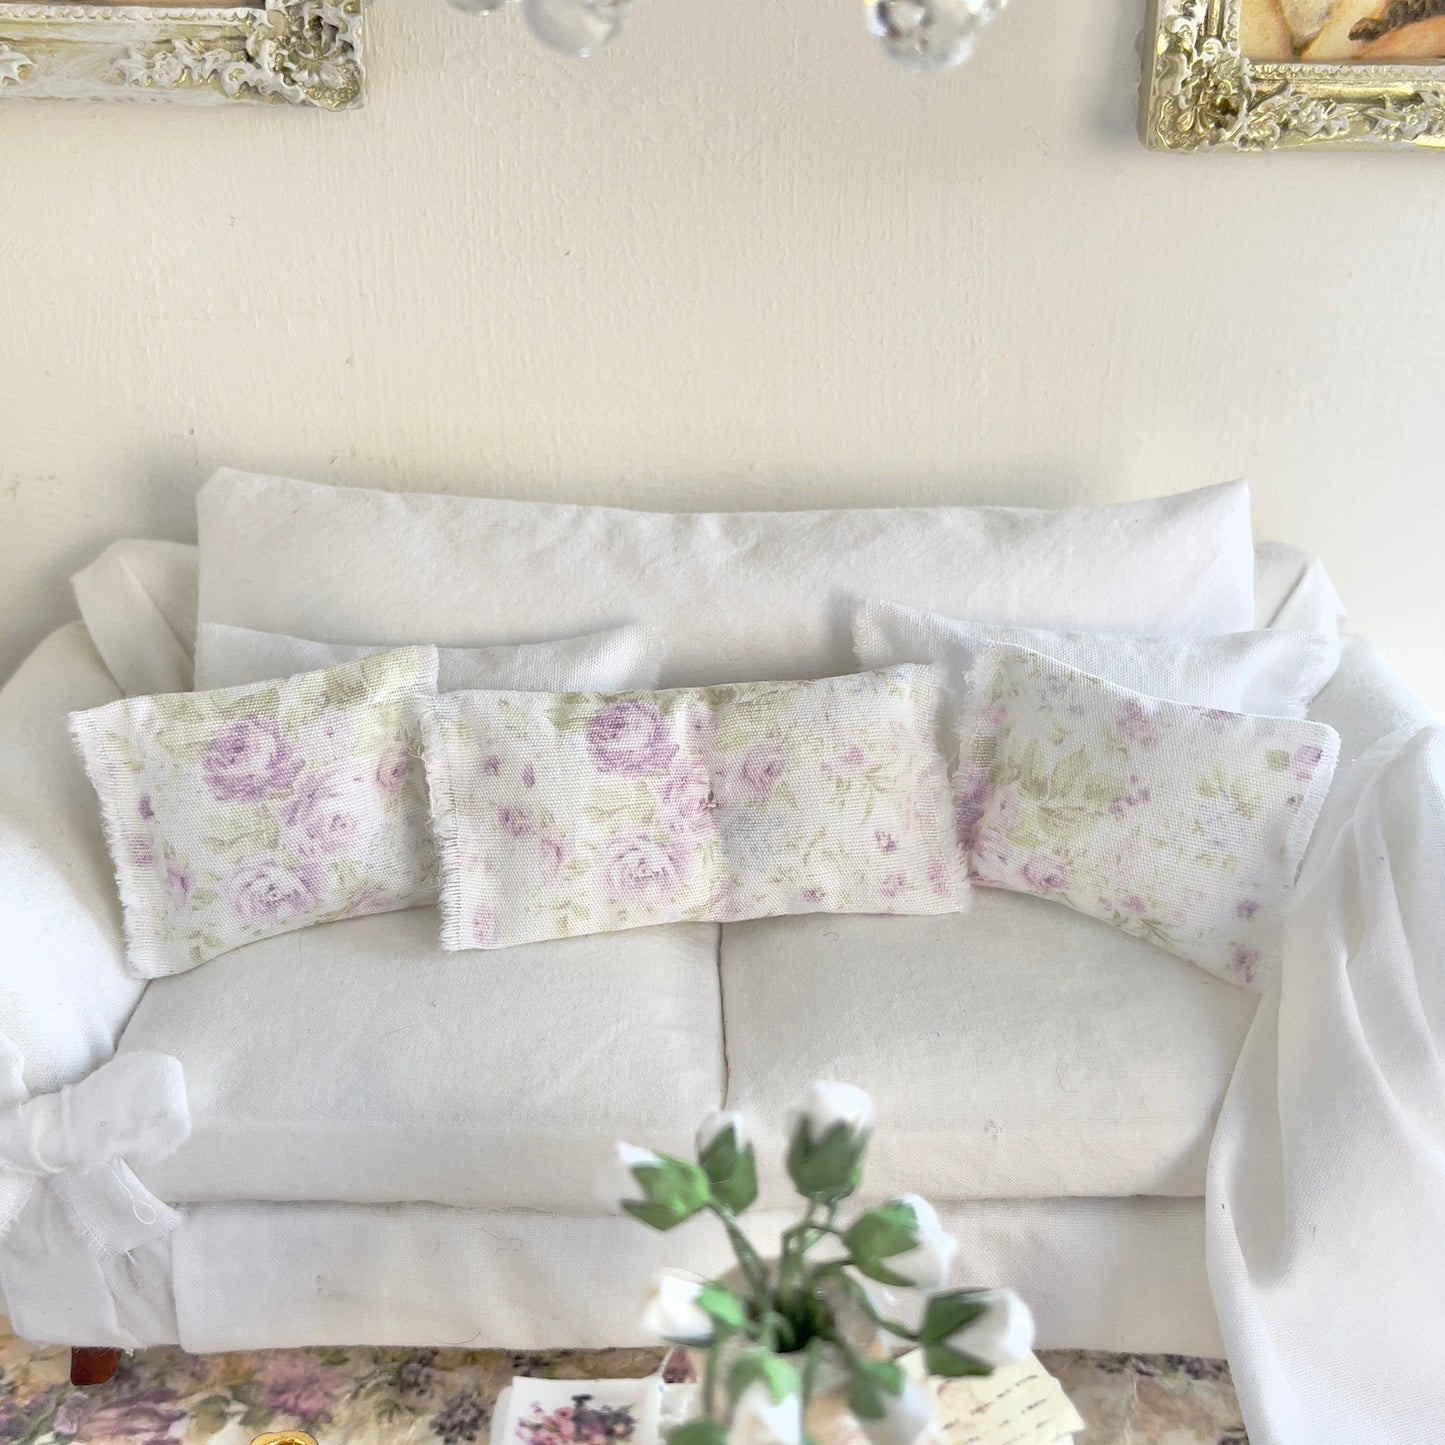 CHANTALLENA Pillow Set | Shabby Lavender Roses with Celery Accents and Throw- 1:12 scale | Shabby 3